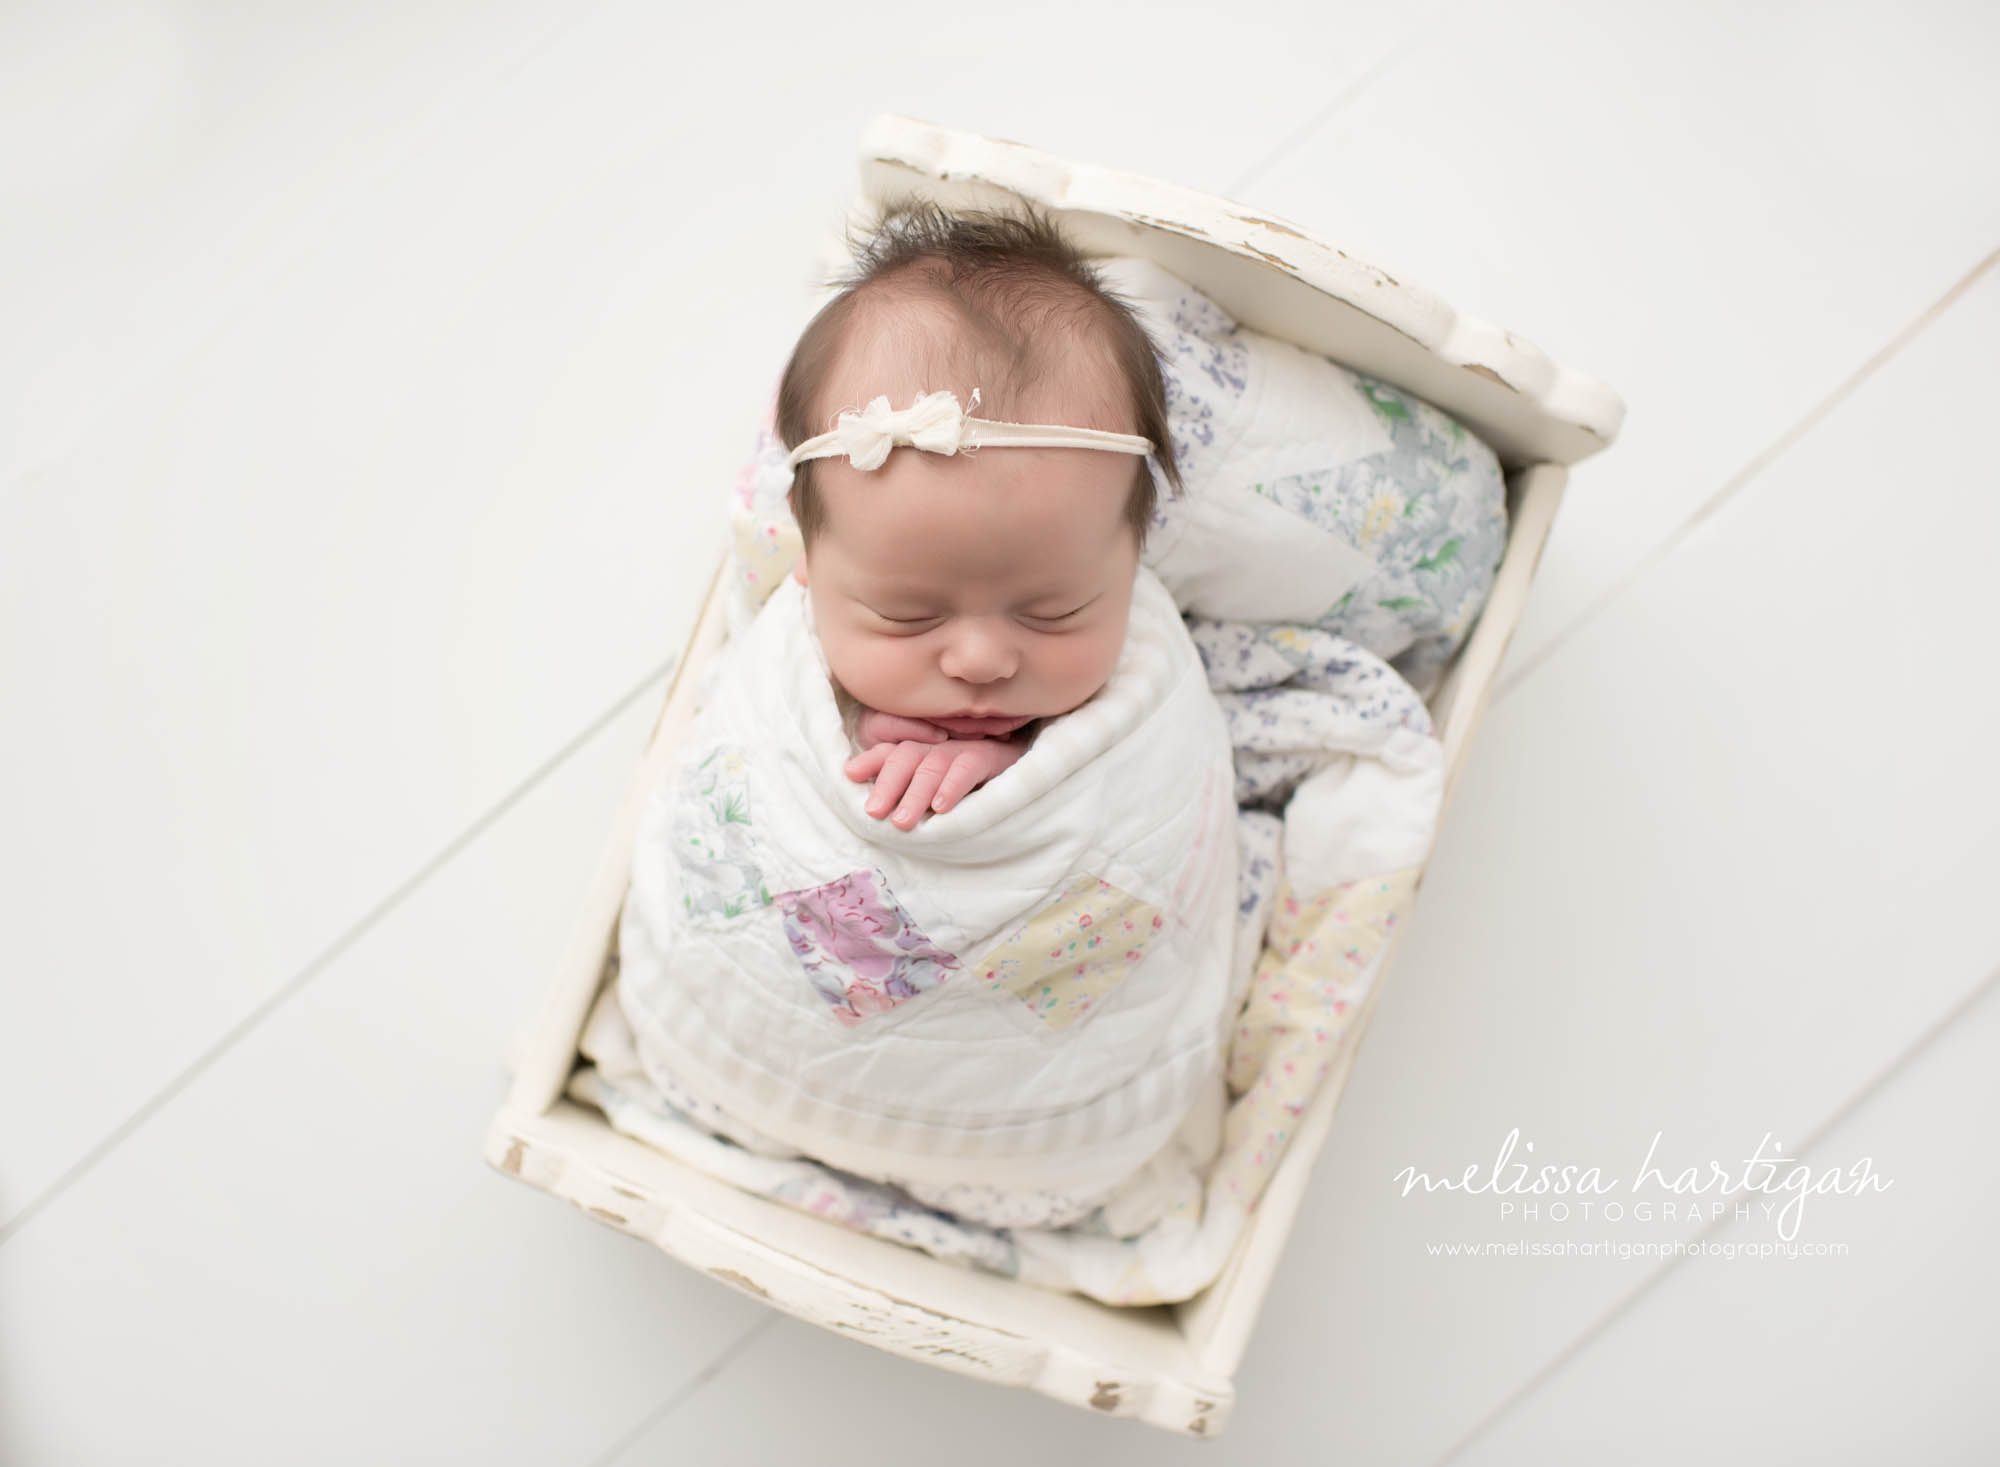 Melissa Hartigan Photography Connecticut Newborn Photographer Coventry Ct Middlefield CT baby Fairfield county Newborn and maternity photography Baby girl cream headband wrapped in patchwork blanket in white wooden bed sleeping